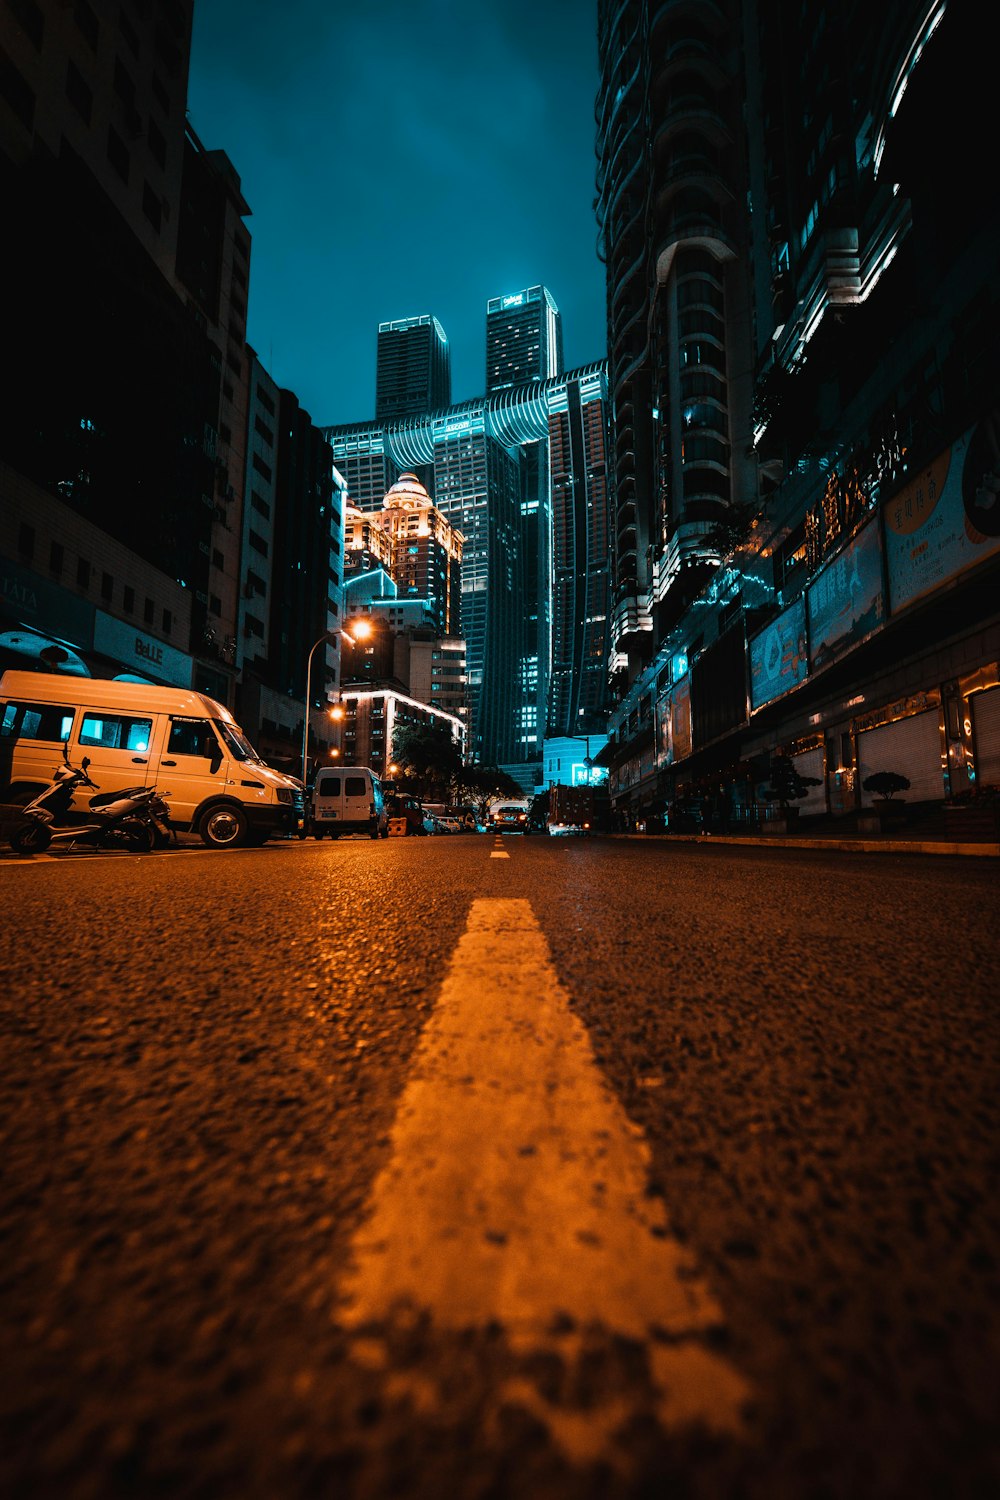 cars on road near buildings during night time